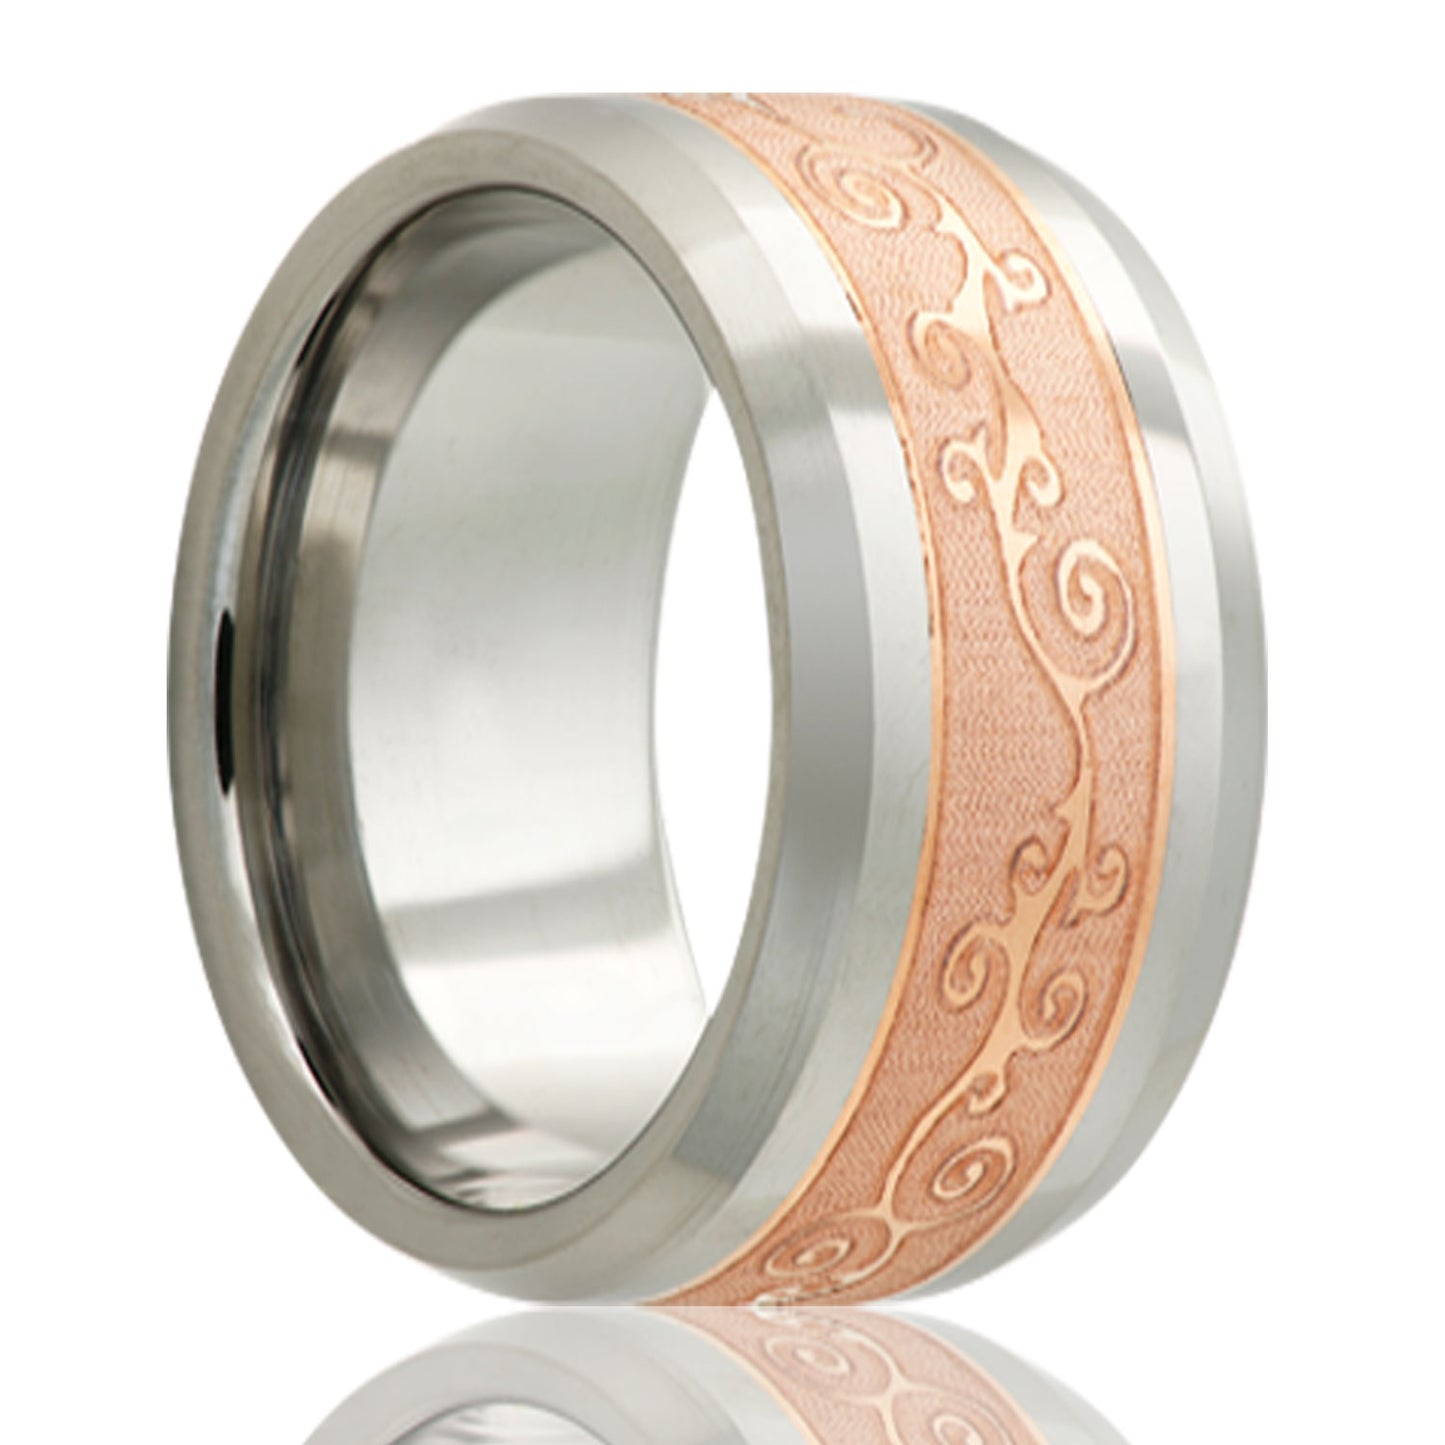 A scroll pattern copper inlay cobalt men's wedding band with beveled edges displayed on a neutral white background.